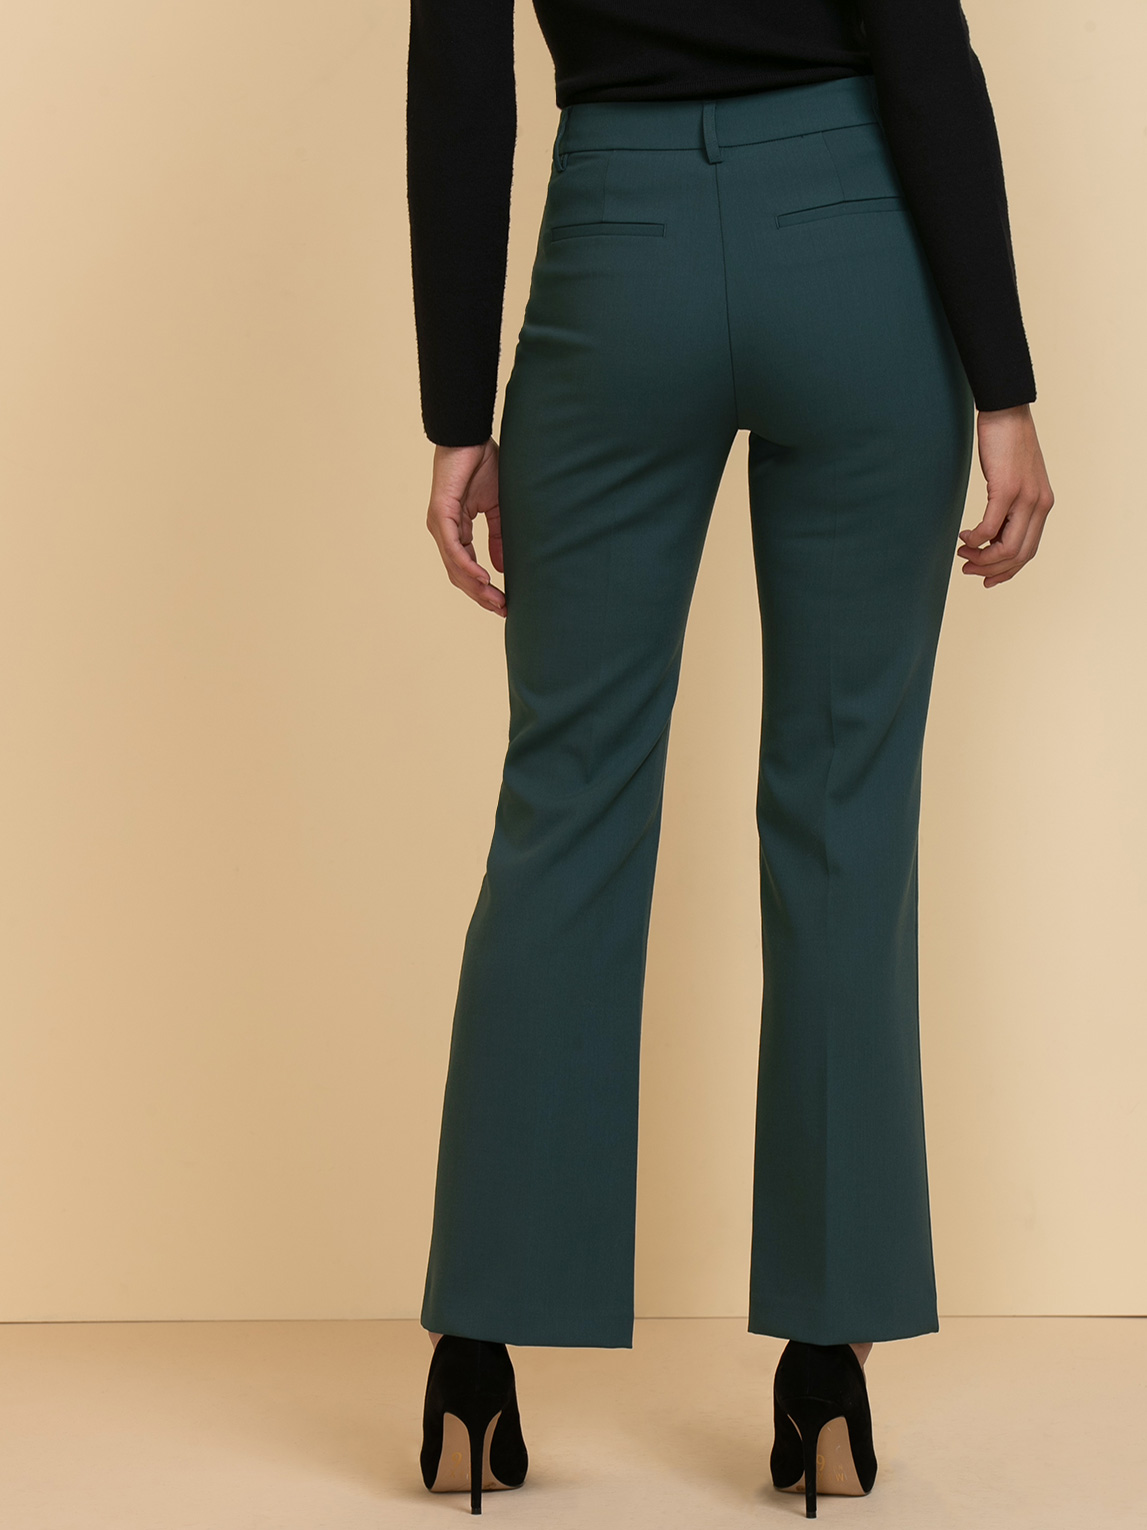 Bradley Bootcut Pant Luxe Tailored